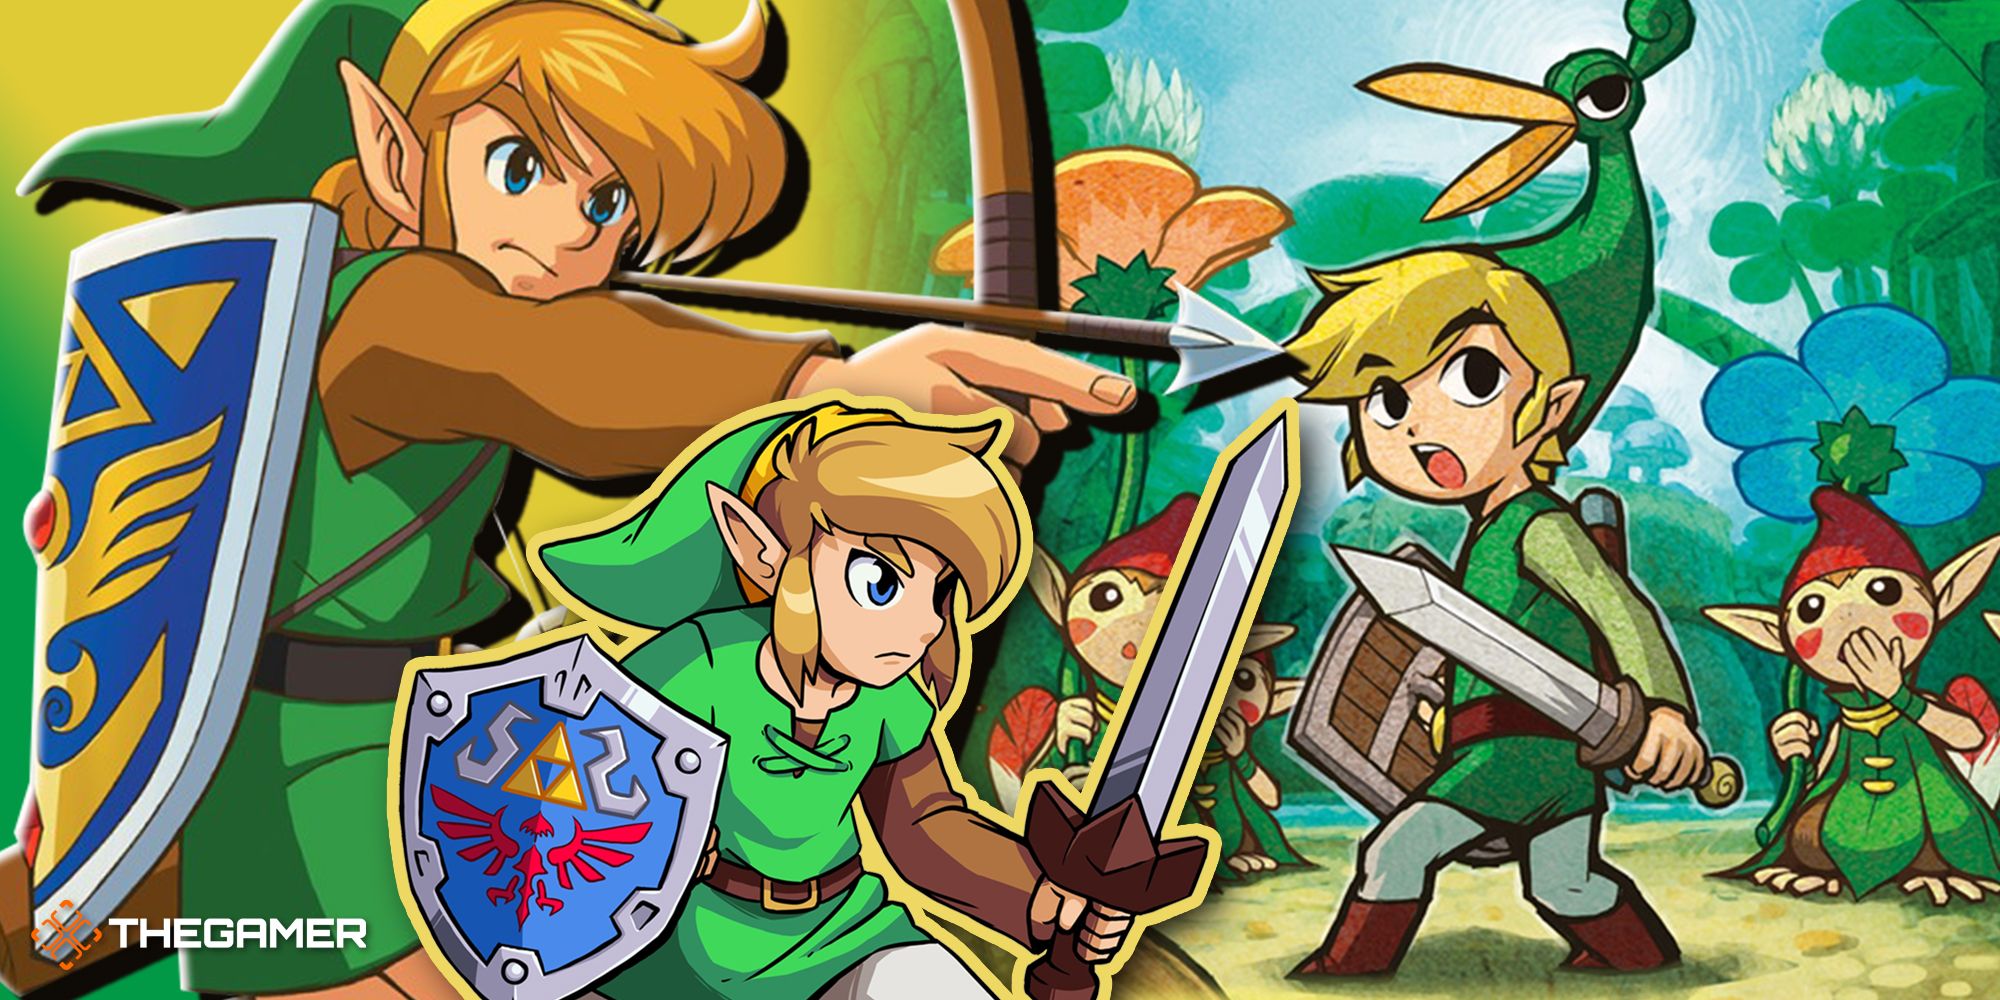 Game art from Cadence Of Hyrule, The Legend Of Zelda: A Link To The Past and The Minish Cap.